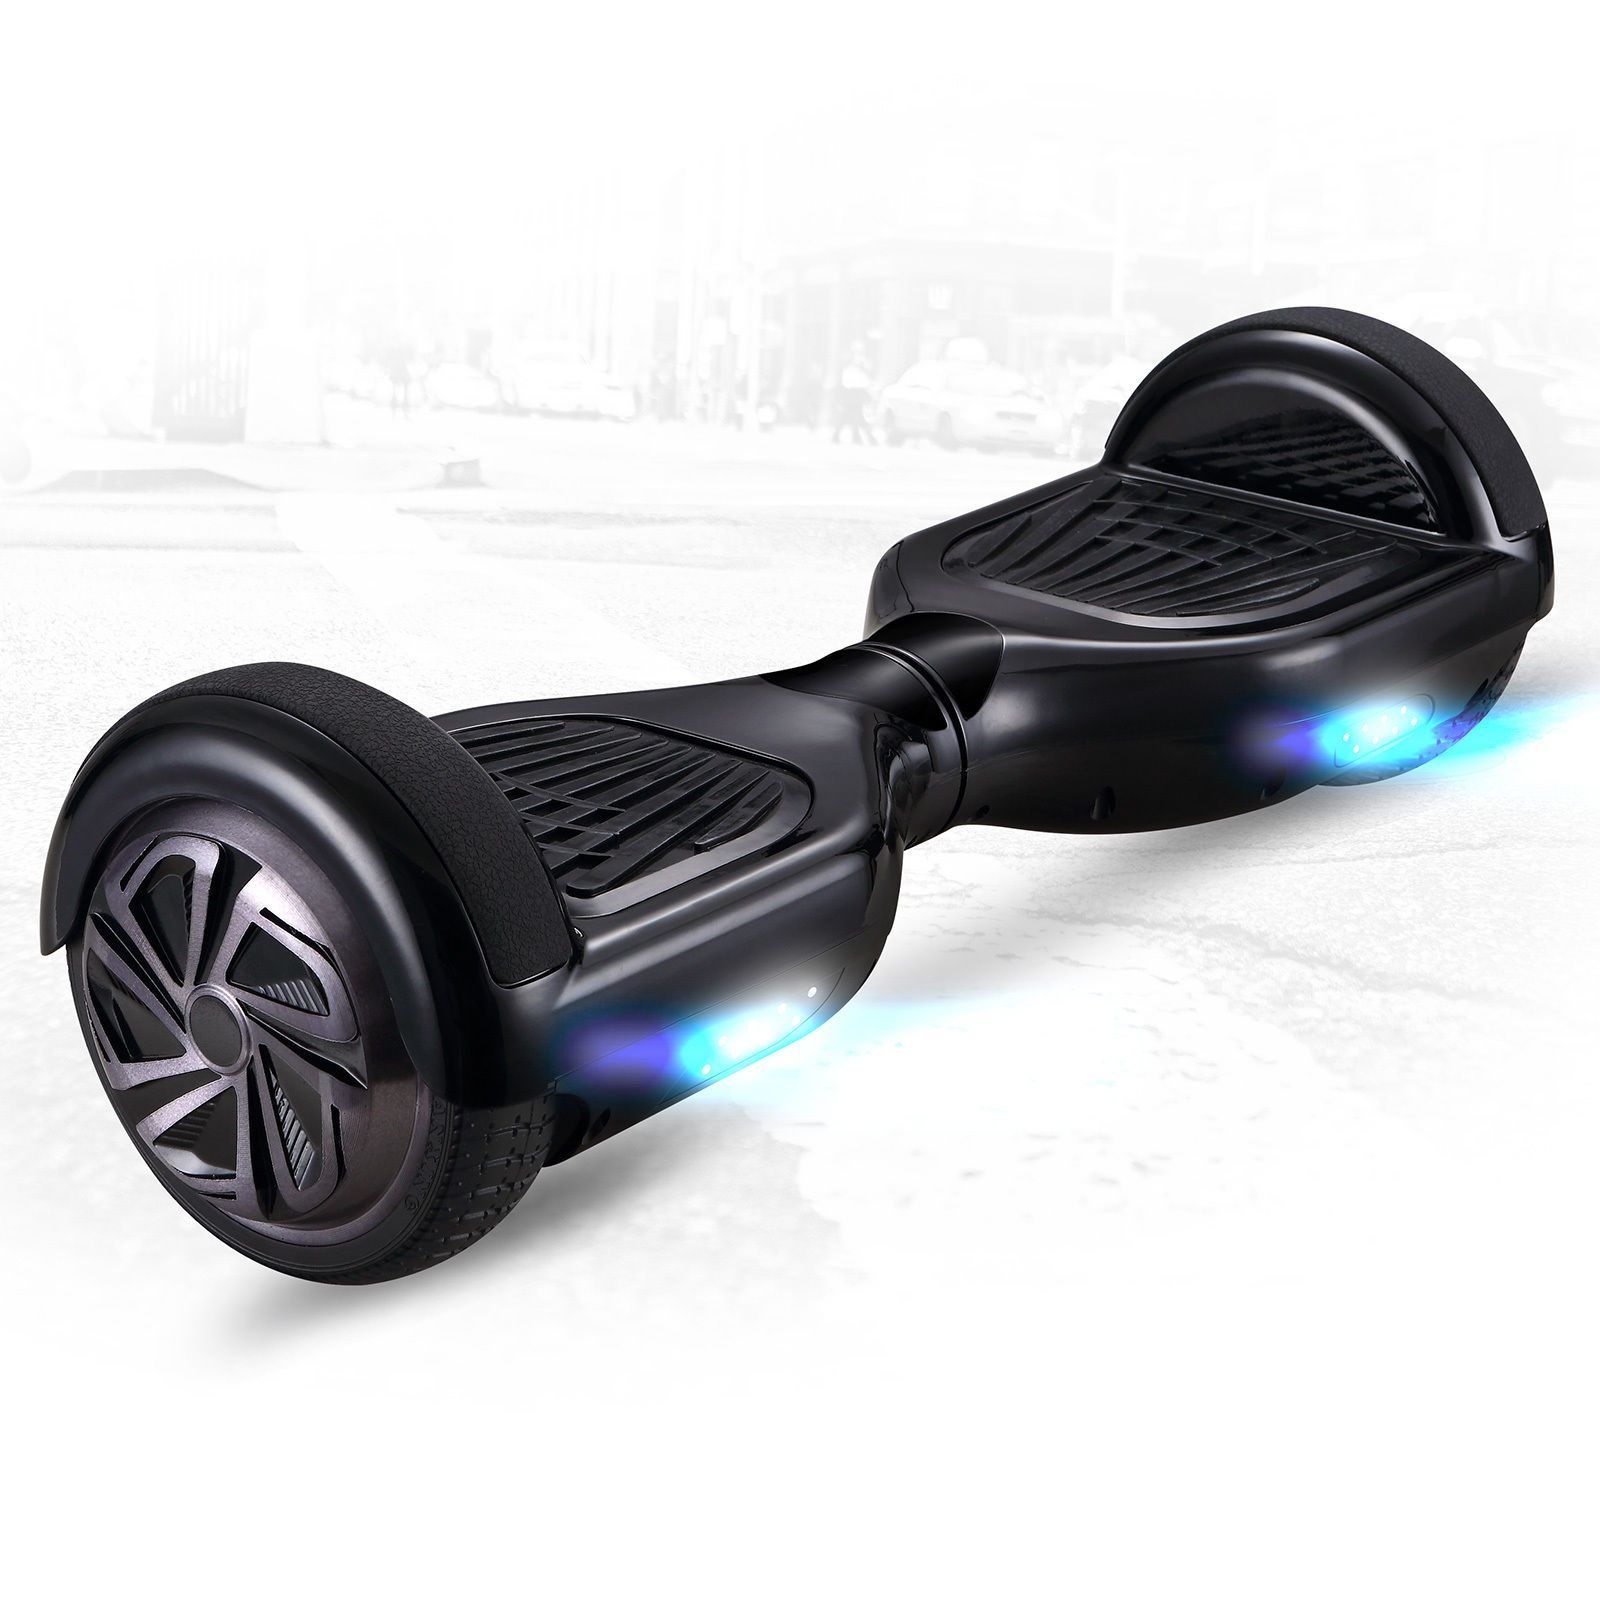 What is Hoverboard?